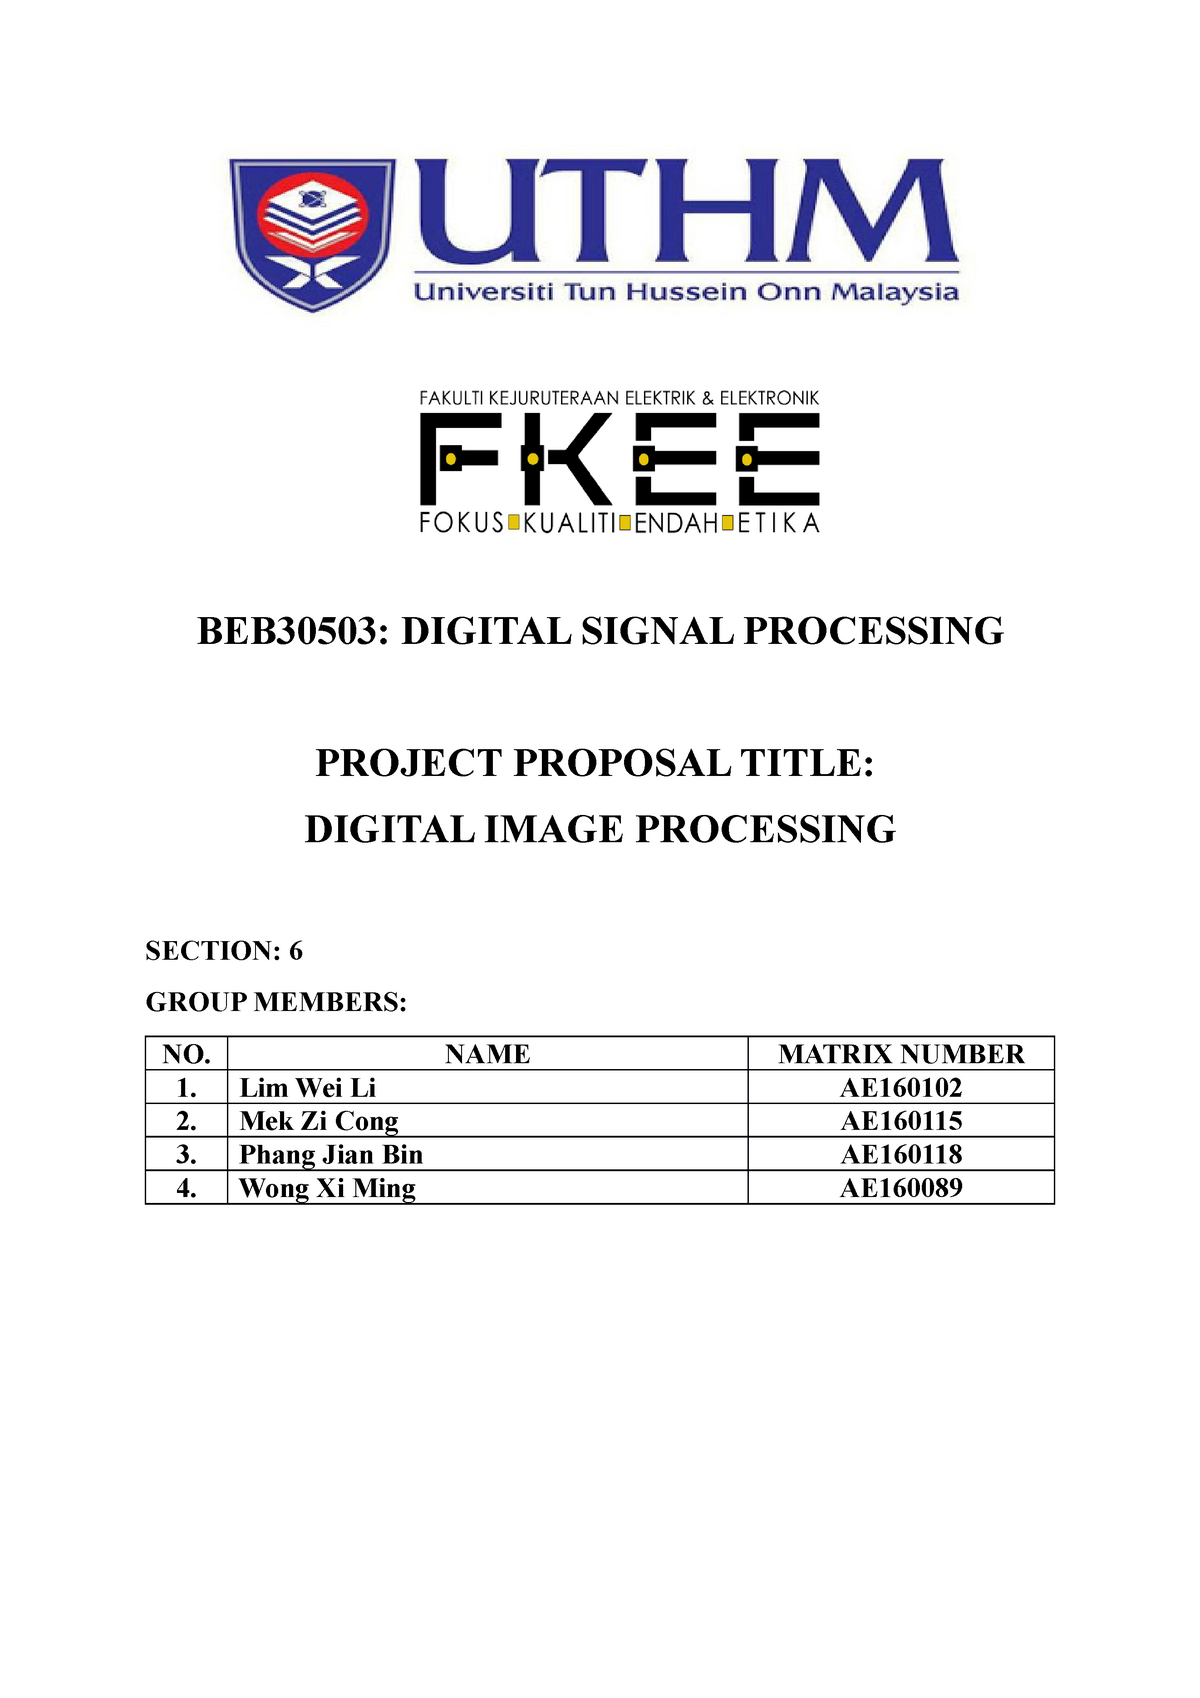 research proposal on digital image processing